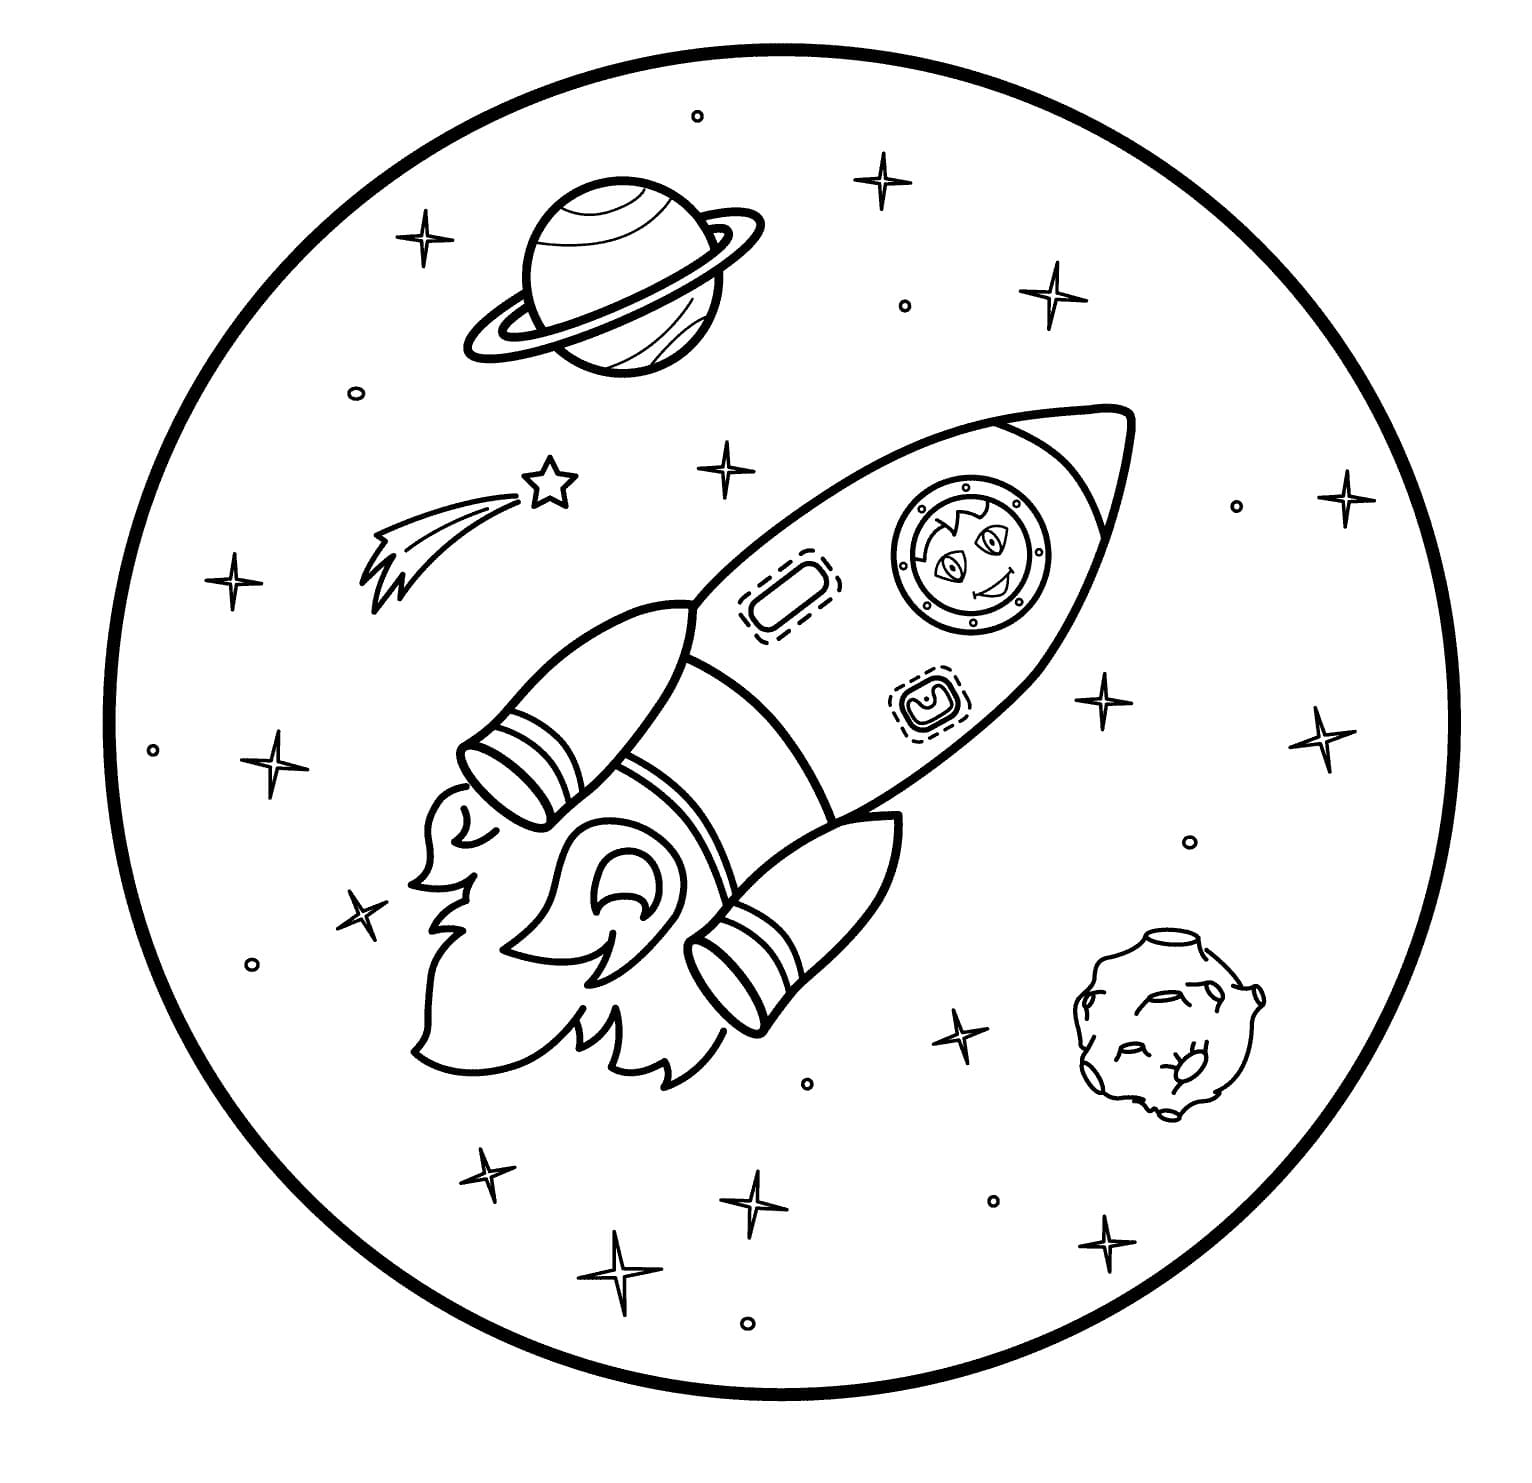 Exciting rocket coloring book for 5-6 year olds